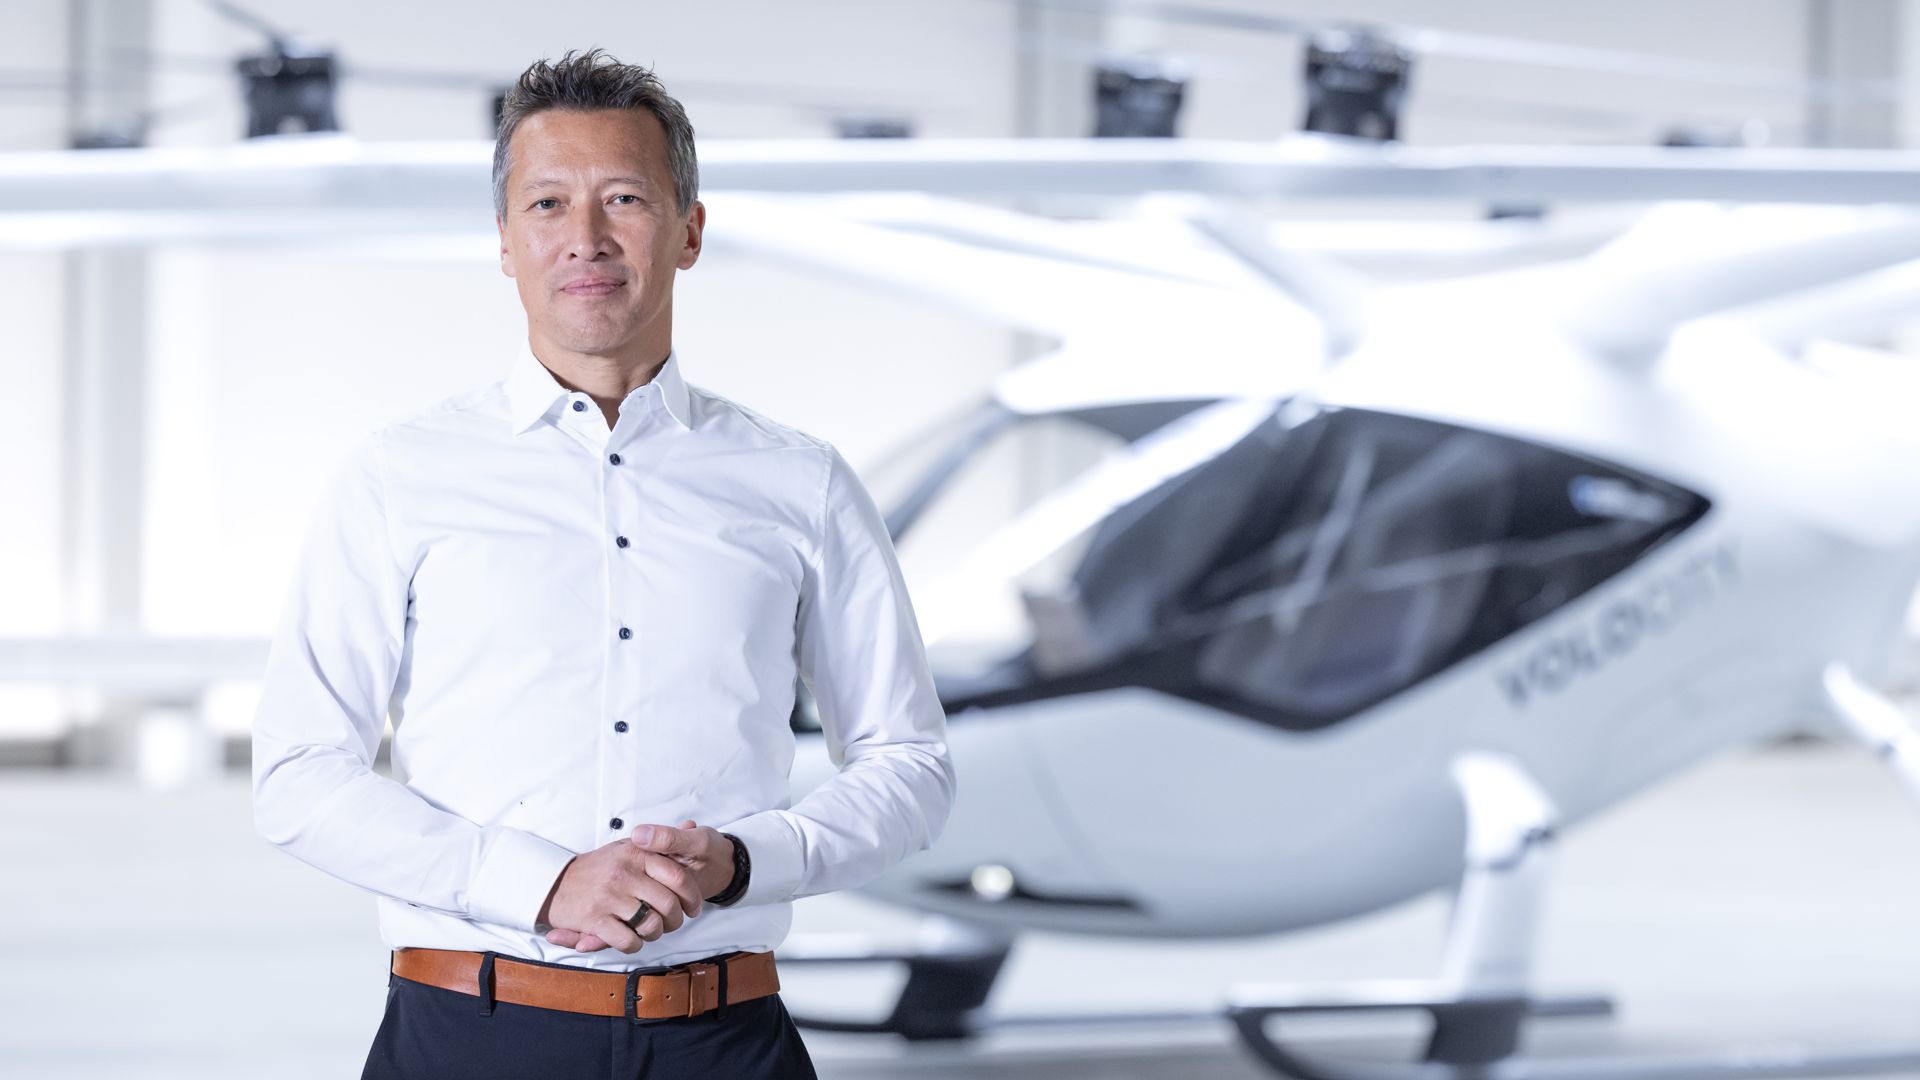 Dirk Hoke, future CEO of Volocopter, in front of the VoloCity
©Volocopter